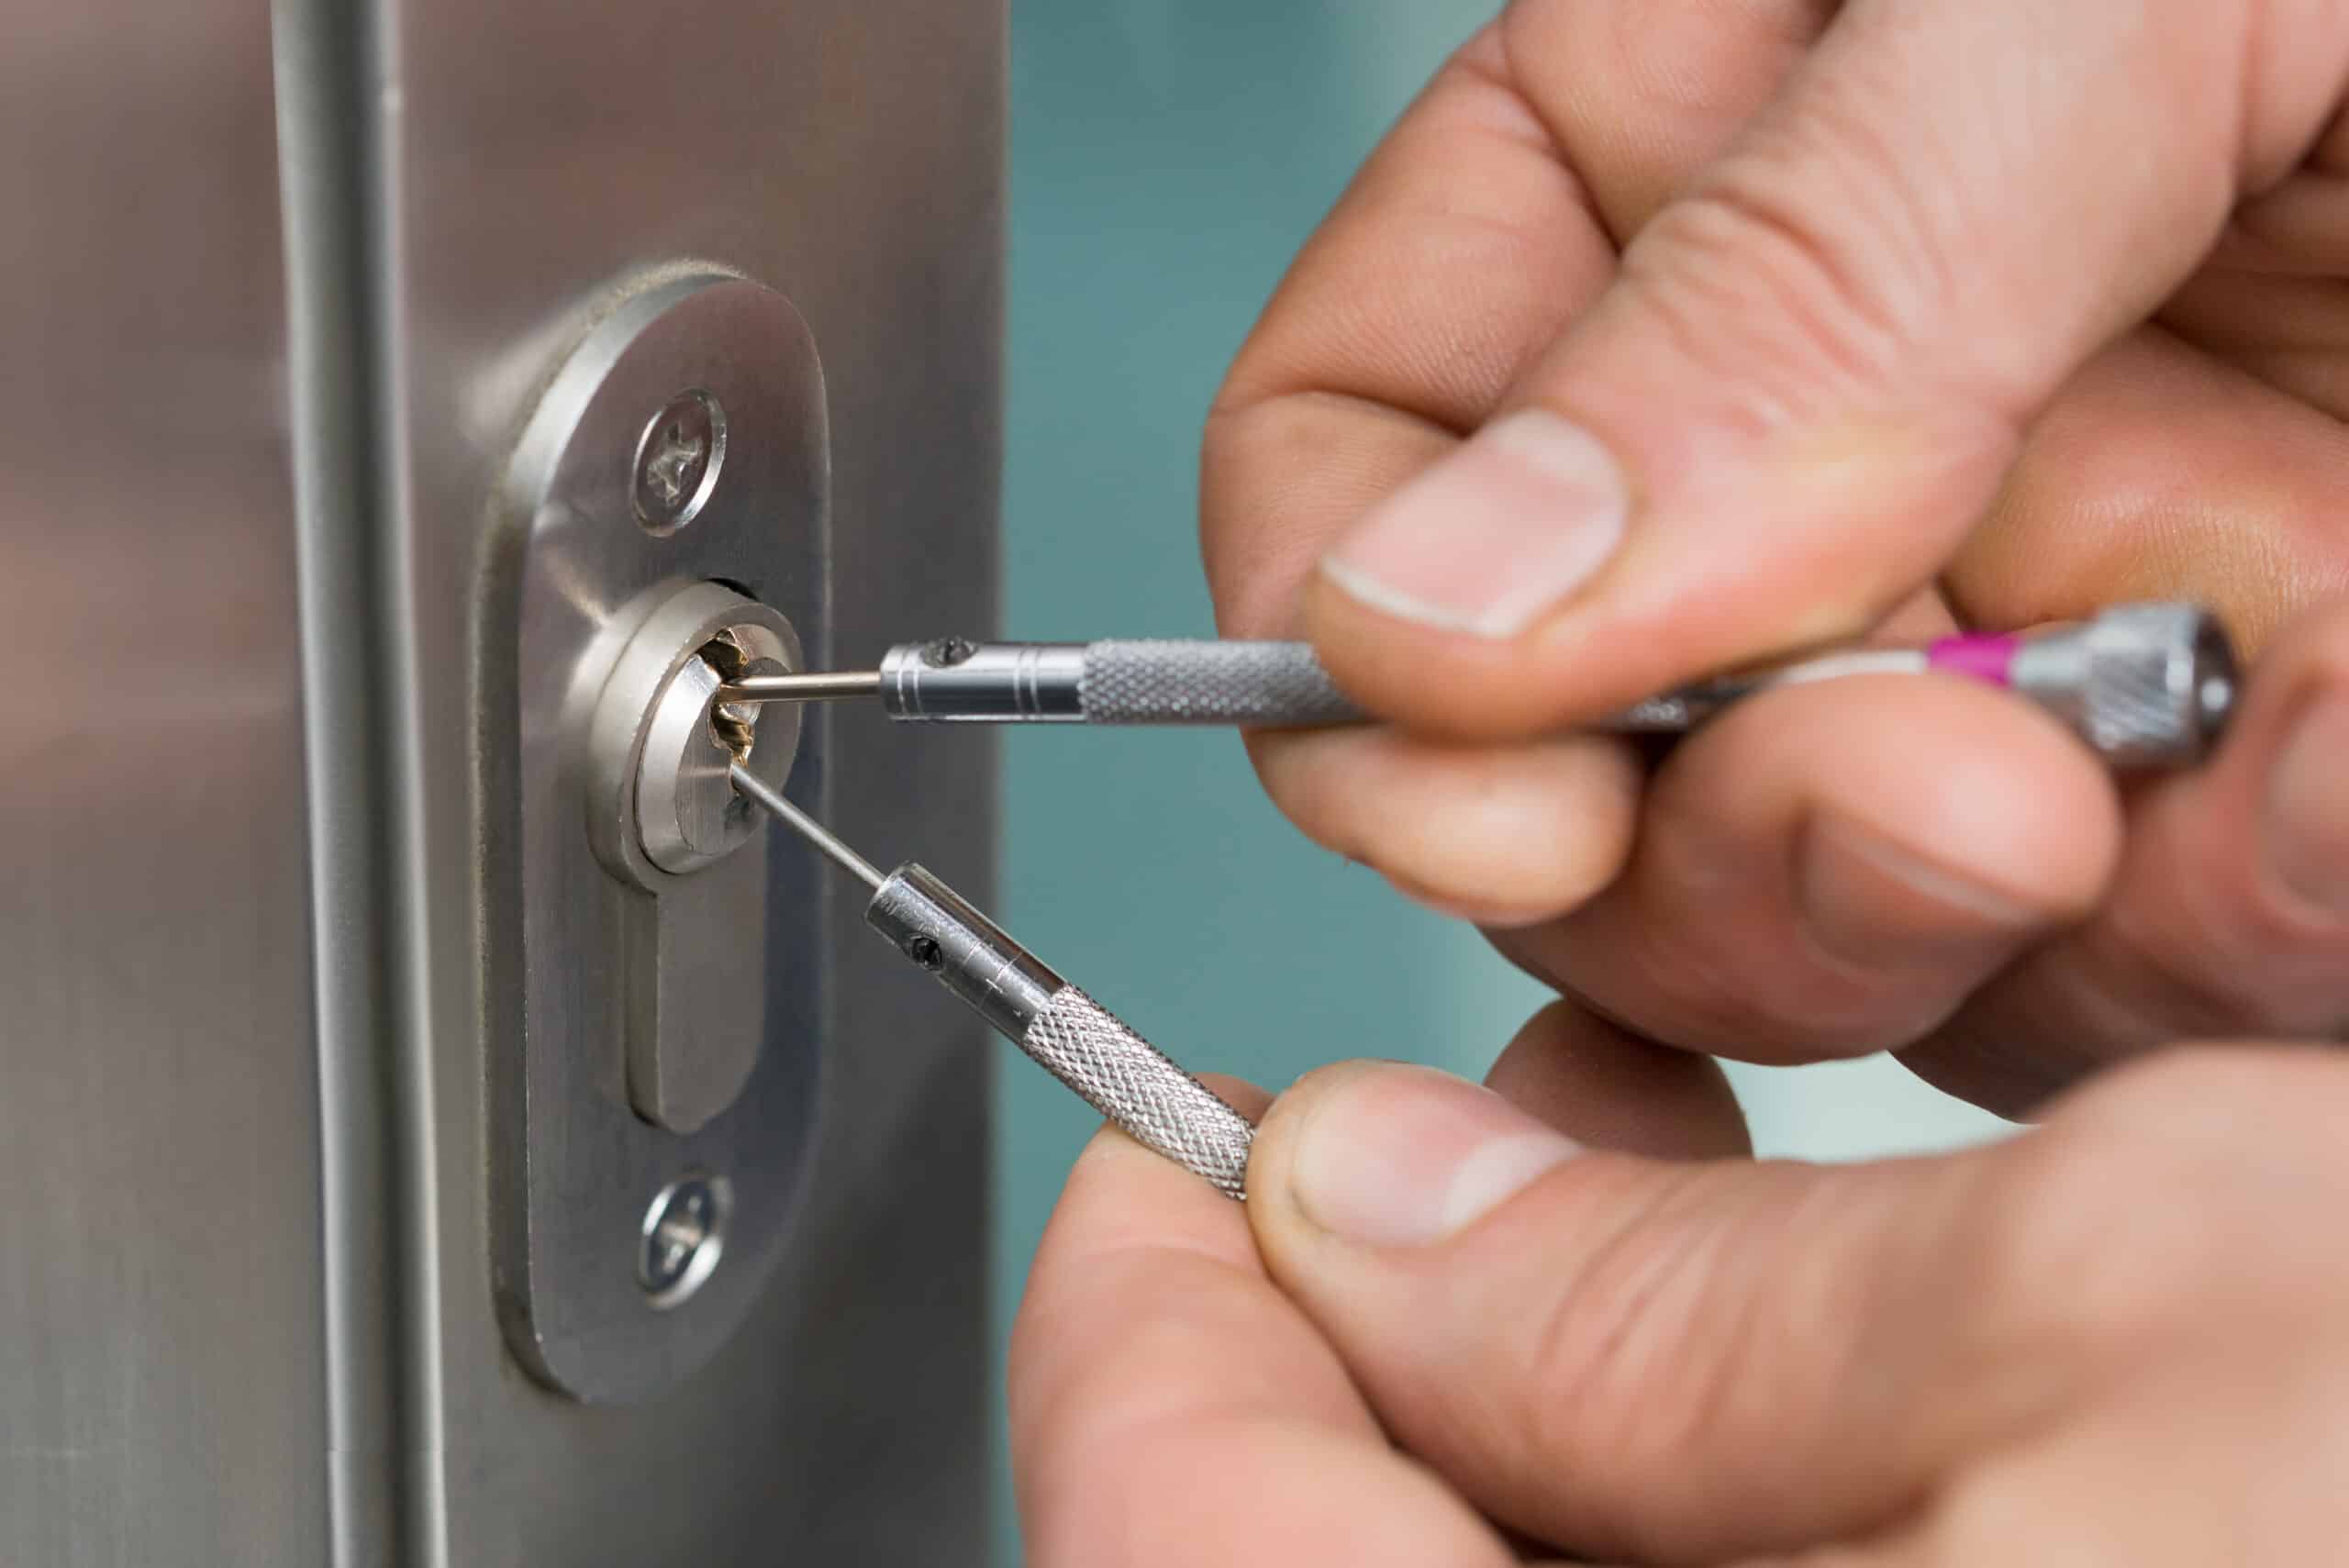 Locksmith Services Concord: Keeping Your Property Safe and Secure